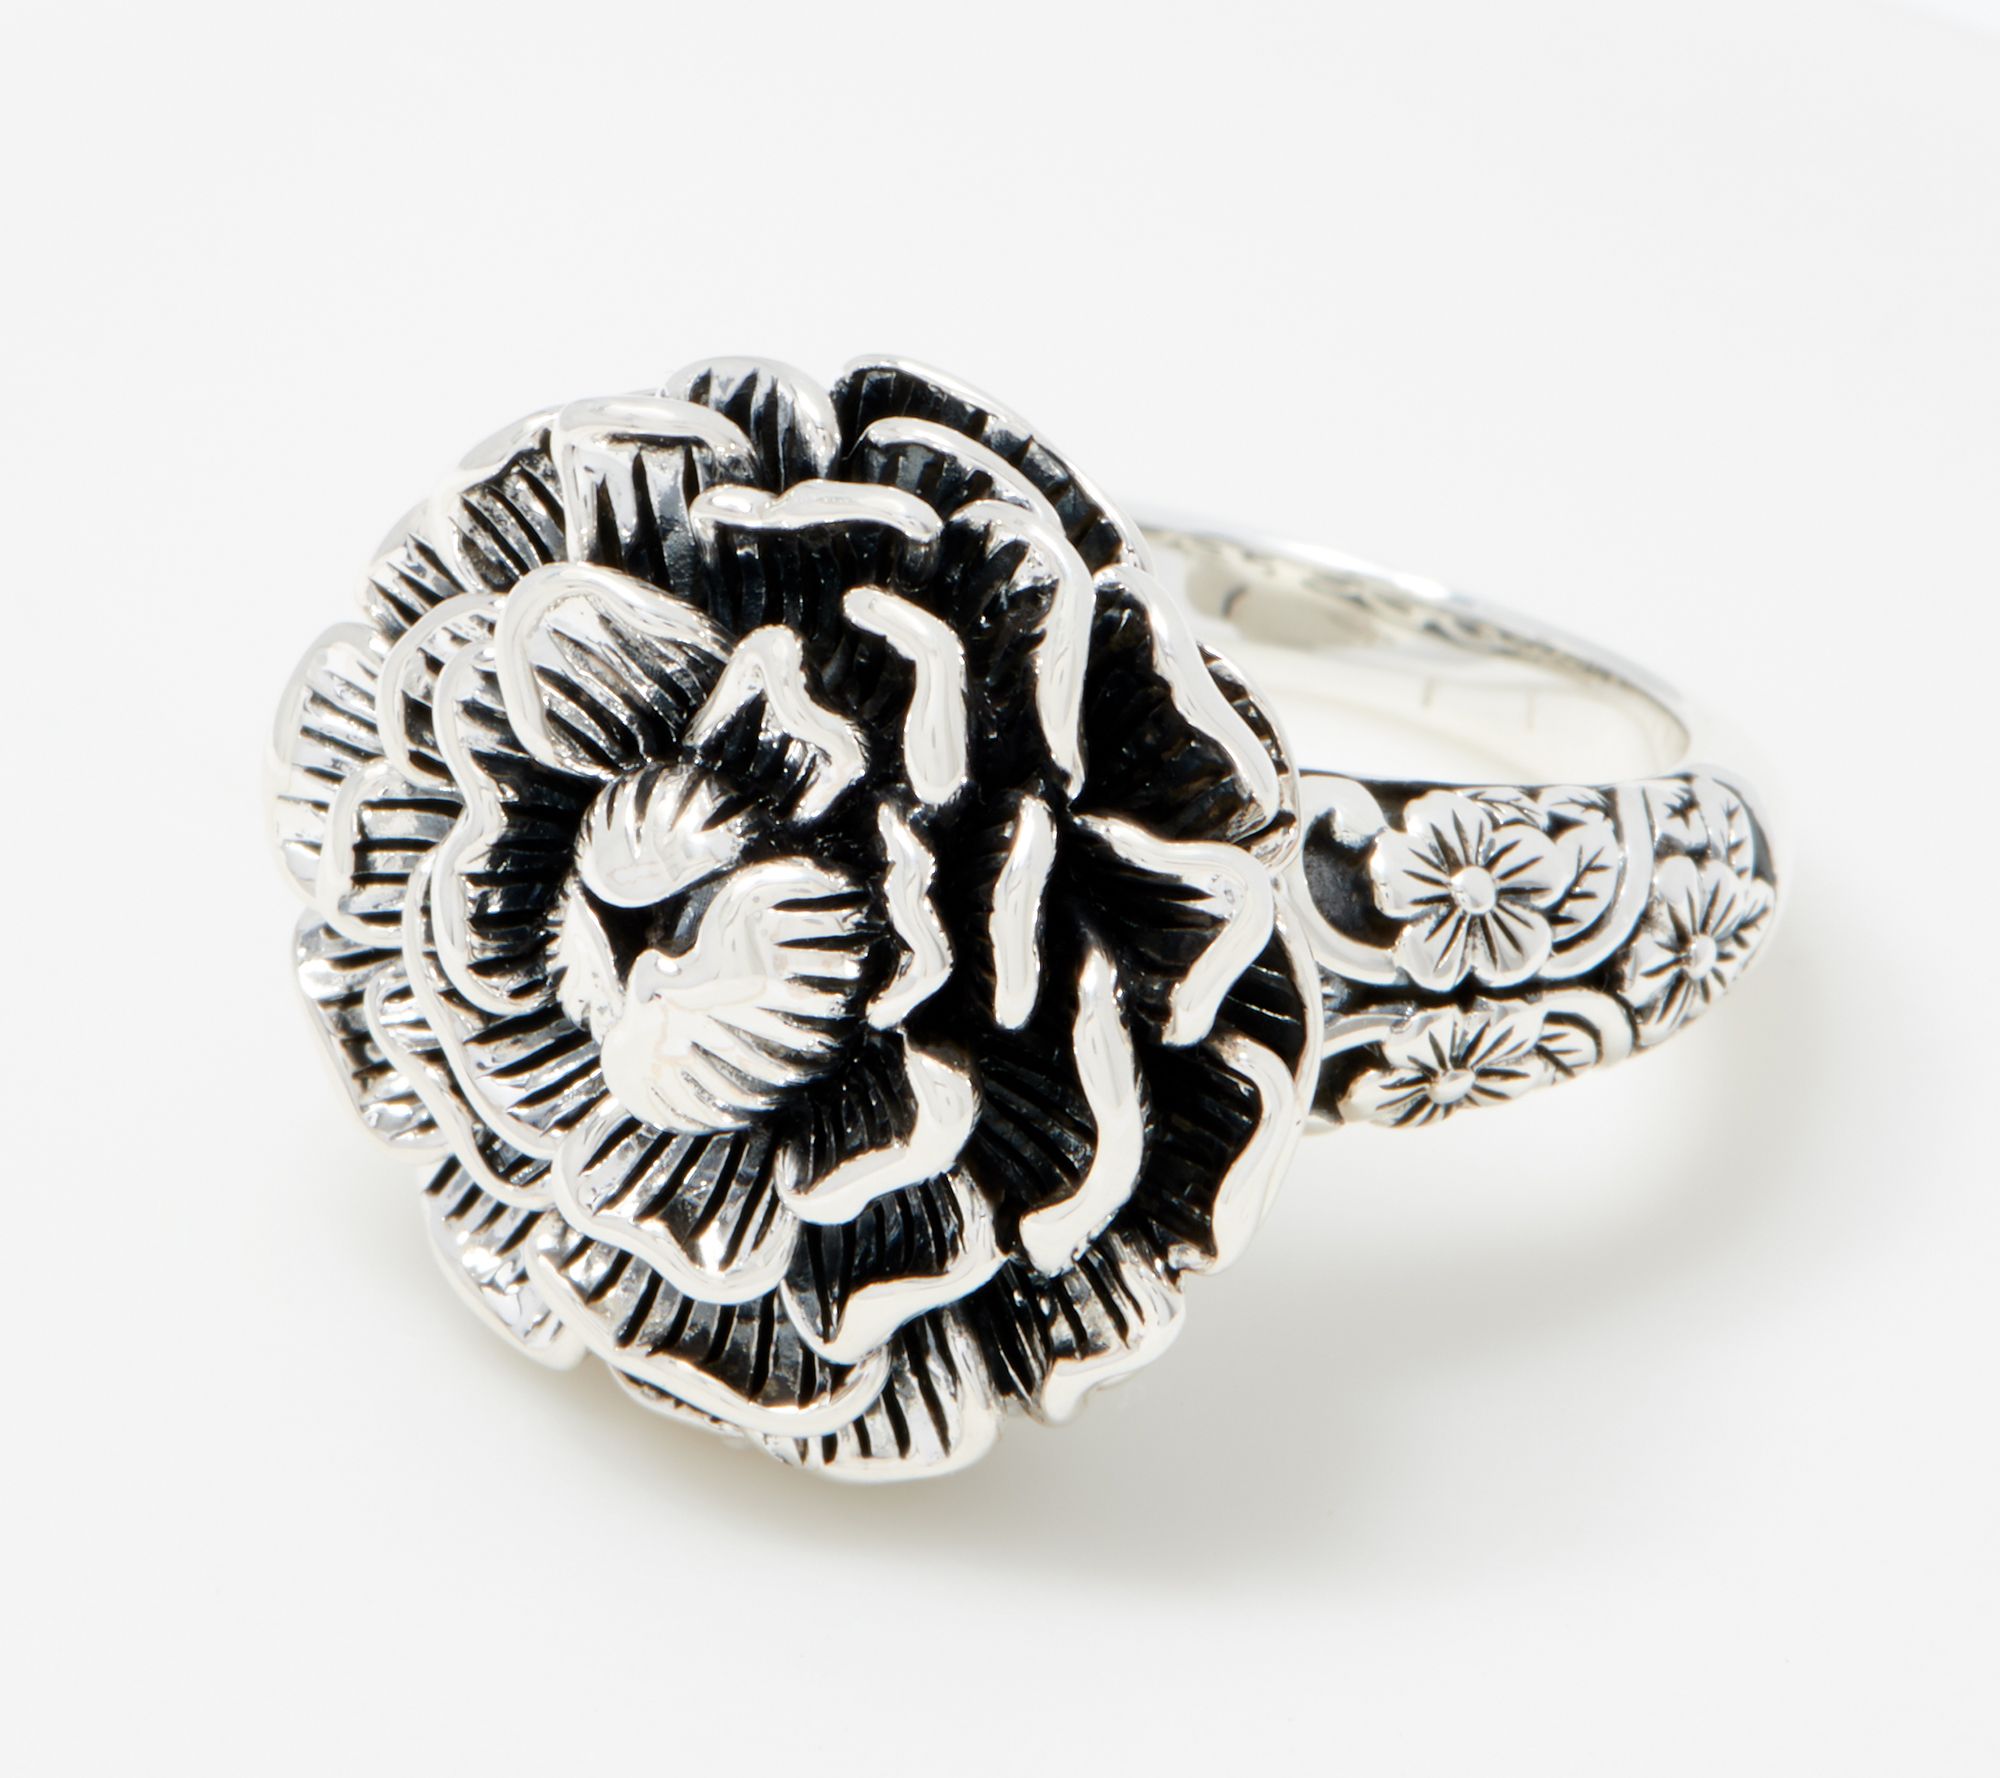 34% off this carved peony ring